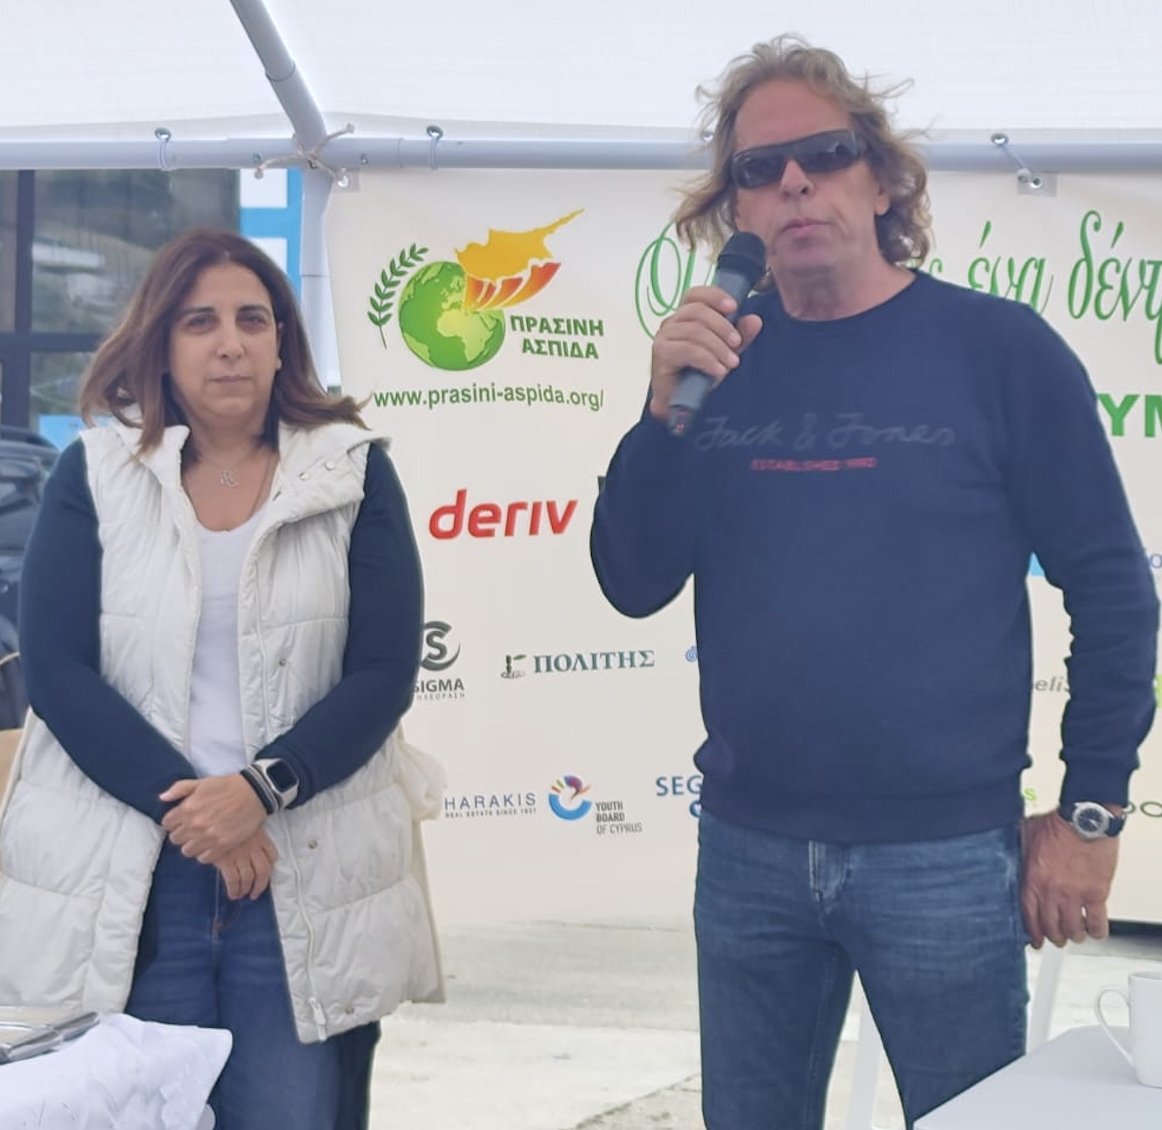 Deriv represented at the You Reforest Cyprus programme in 2023